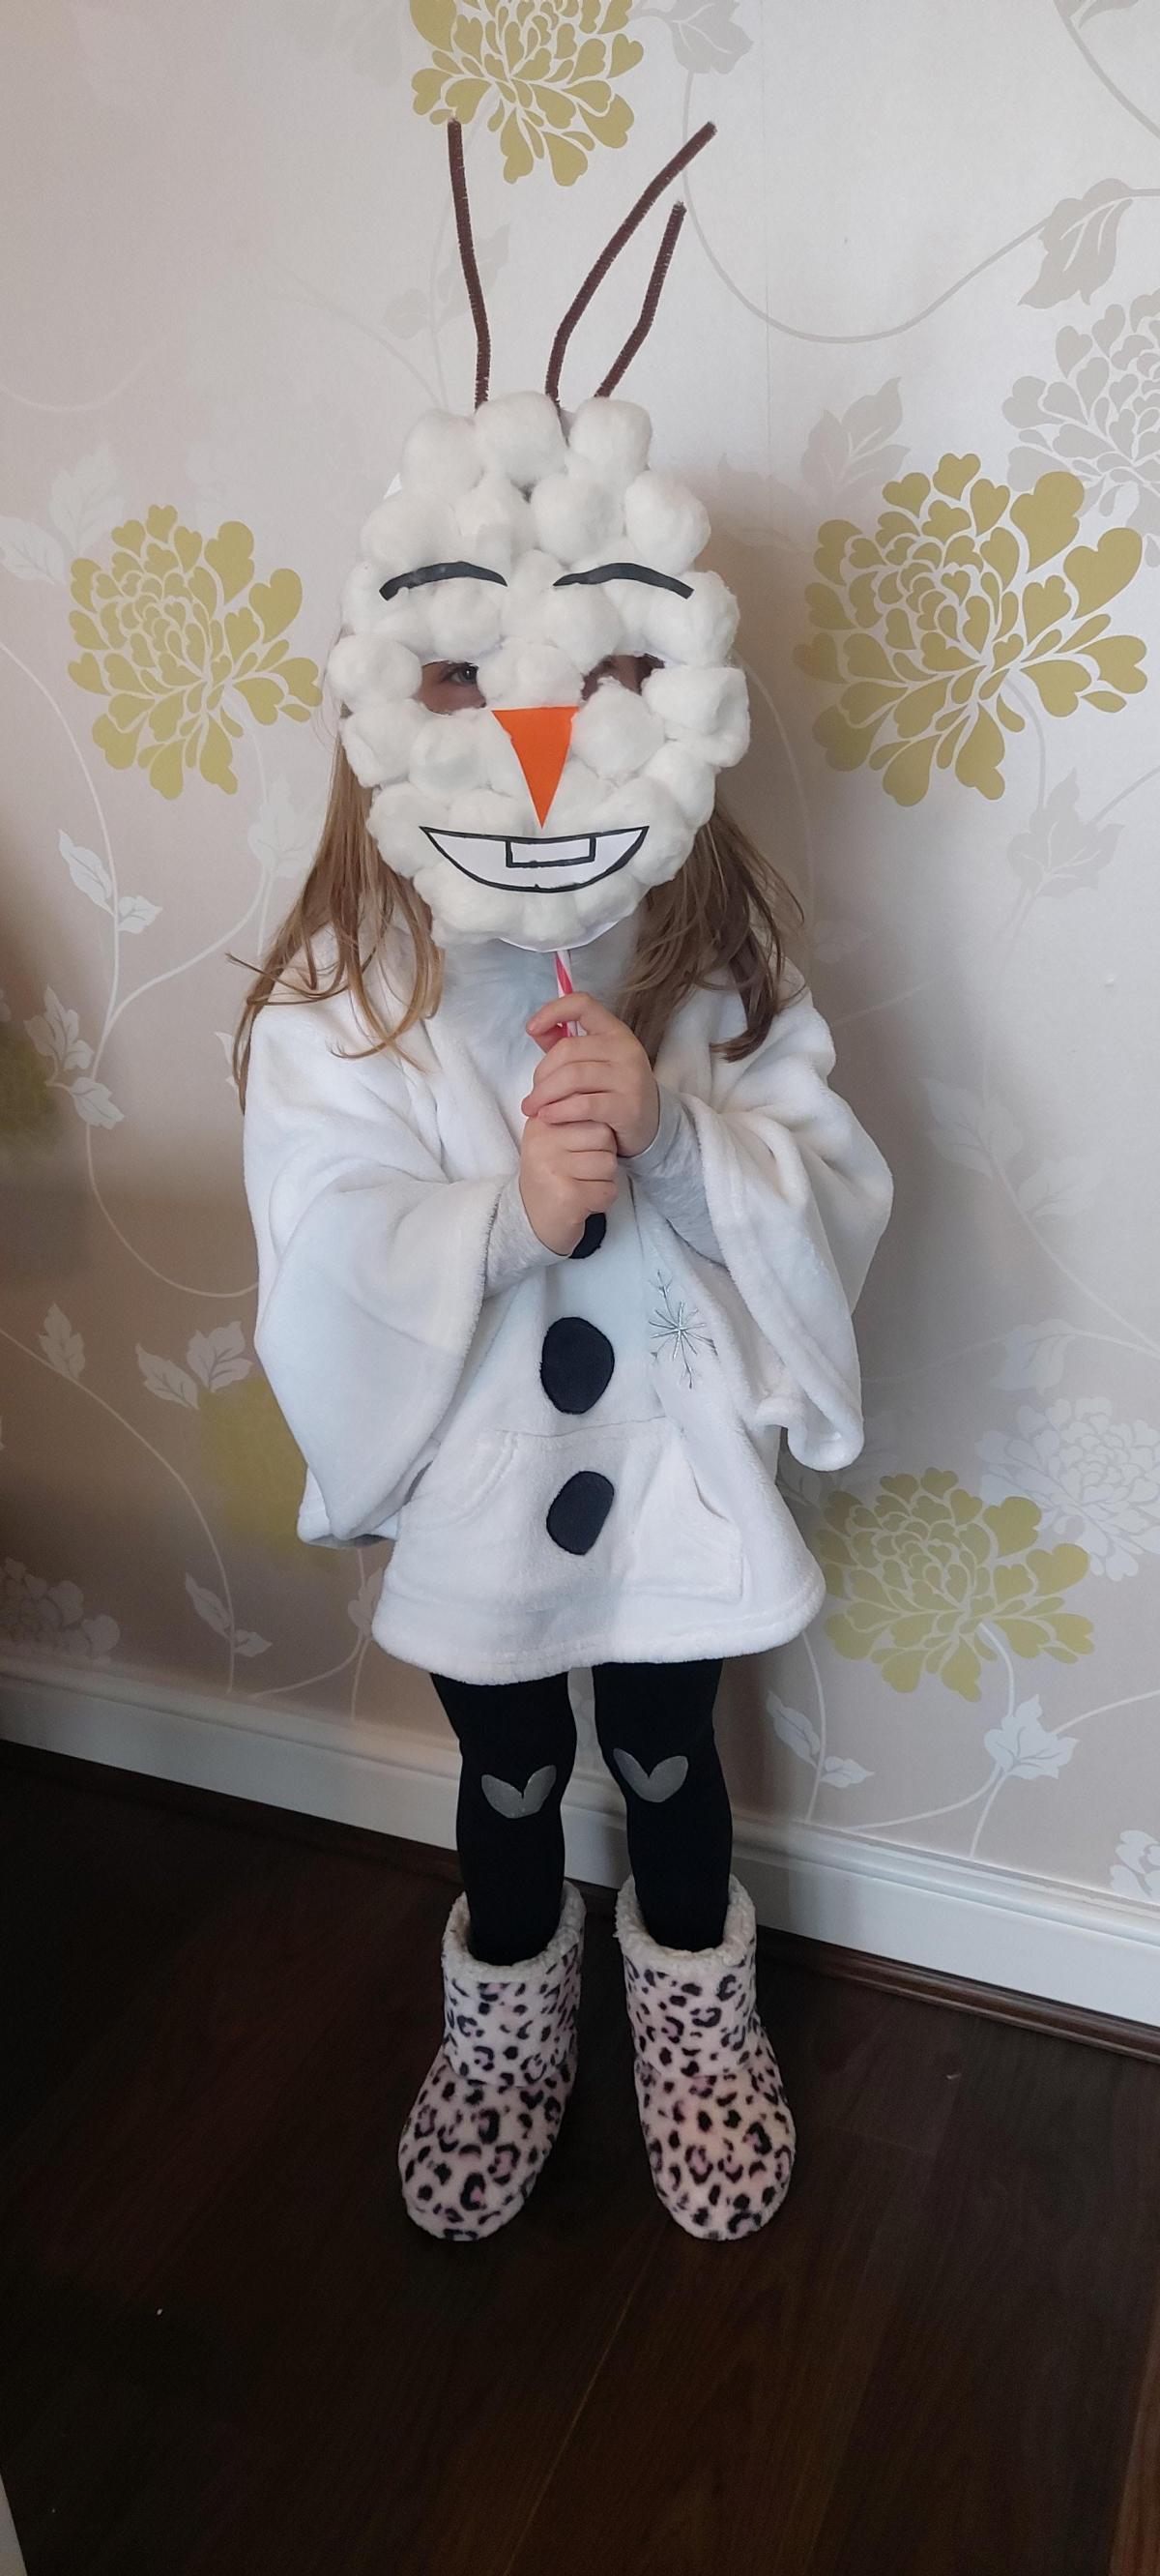 Feeling artsy? How about making your own Olaf mask